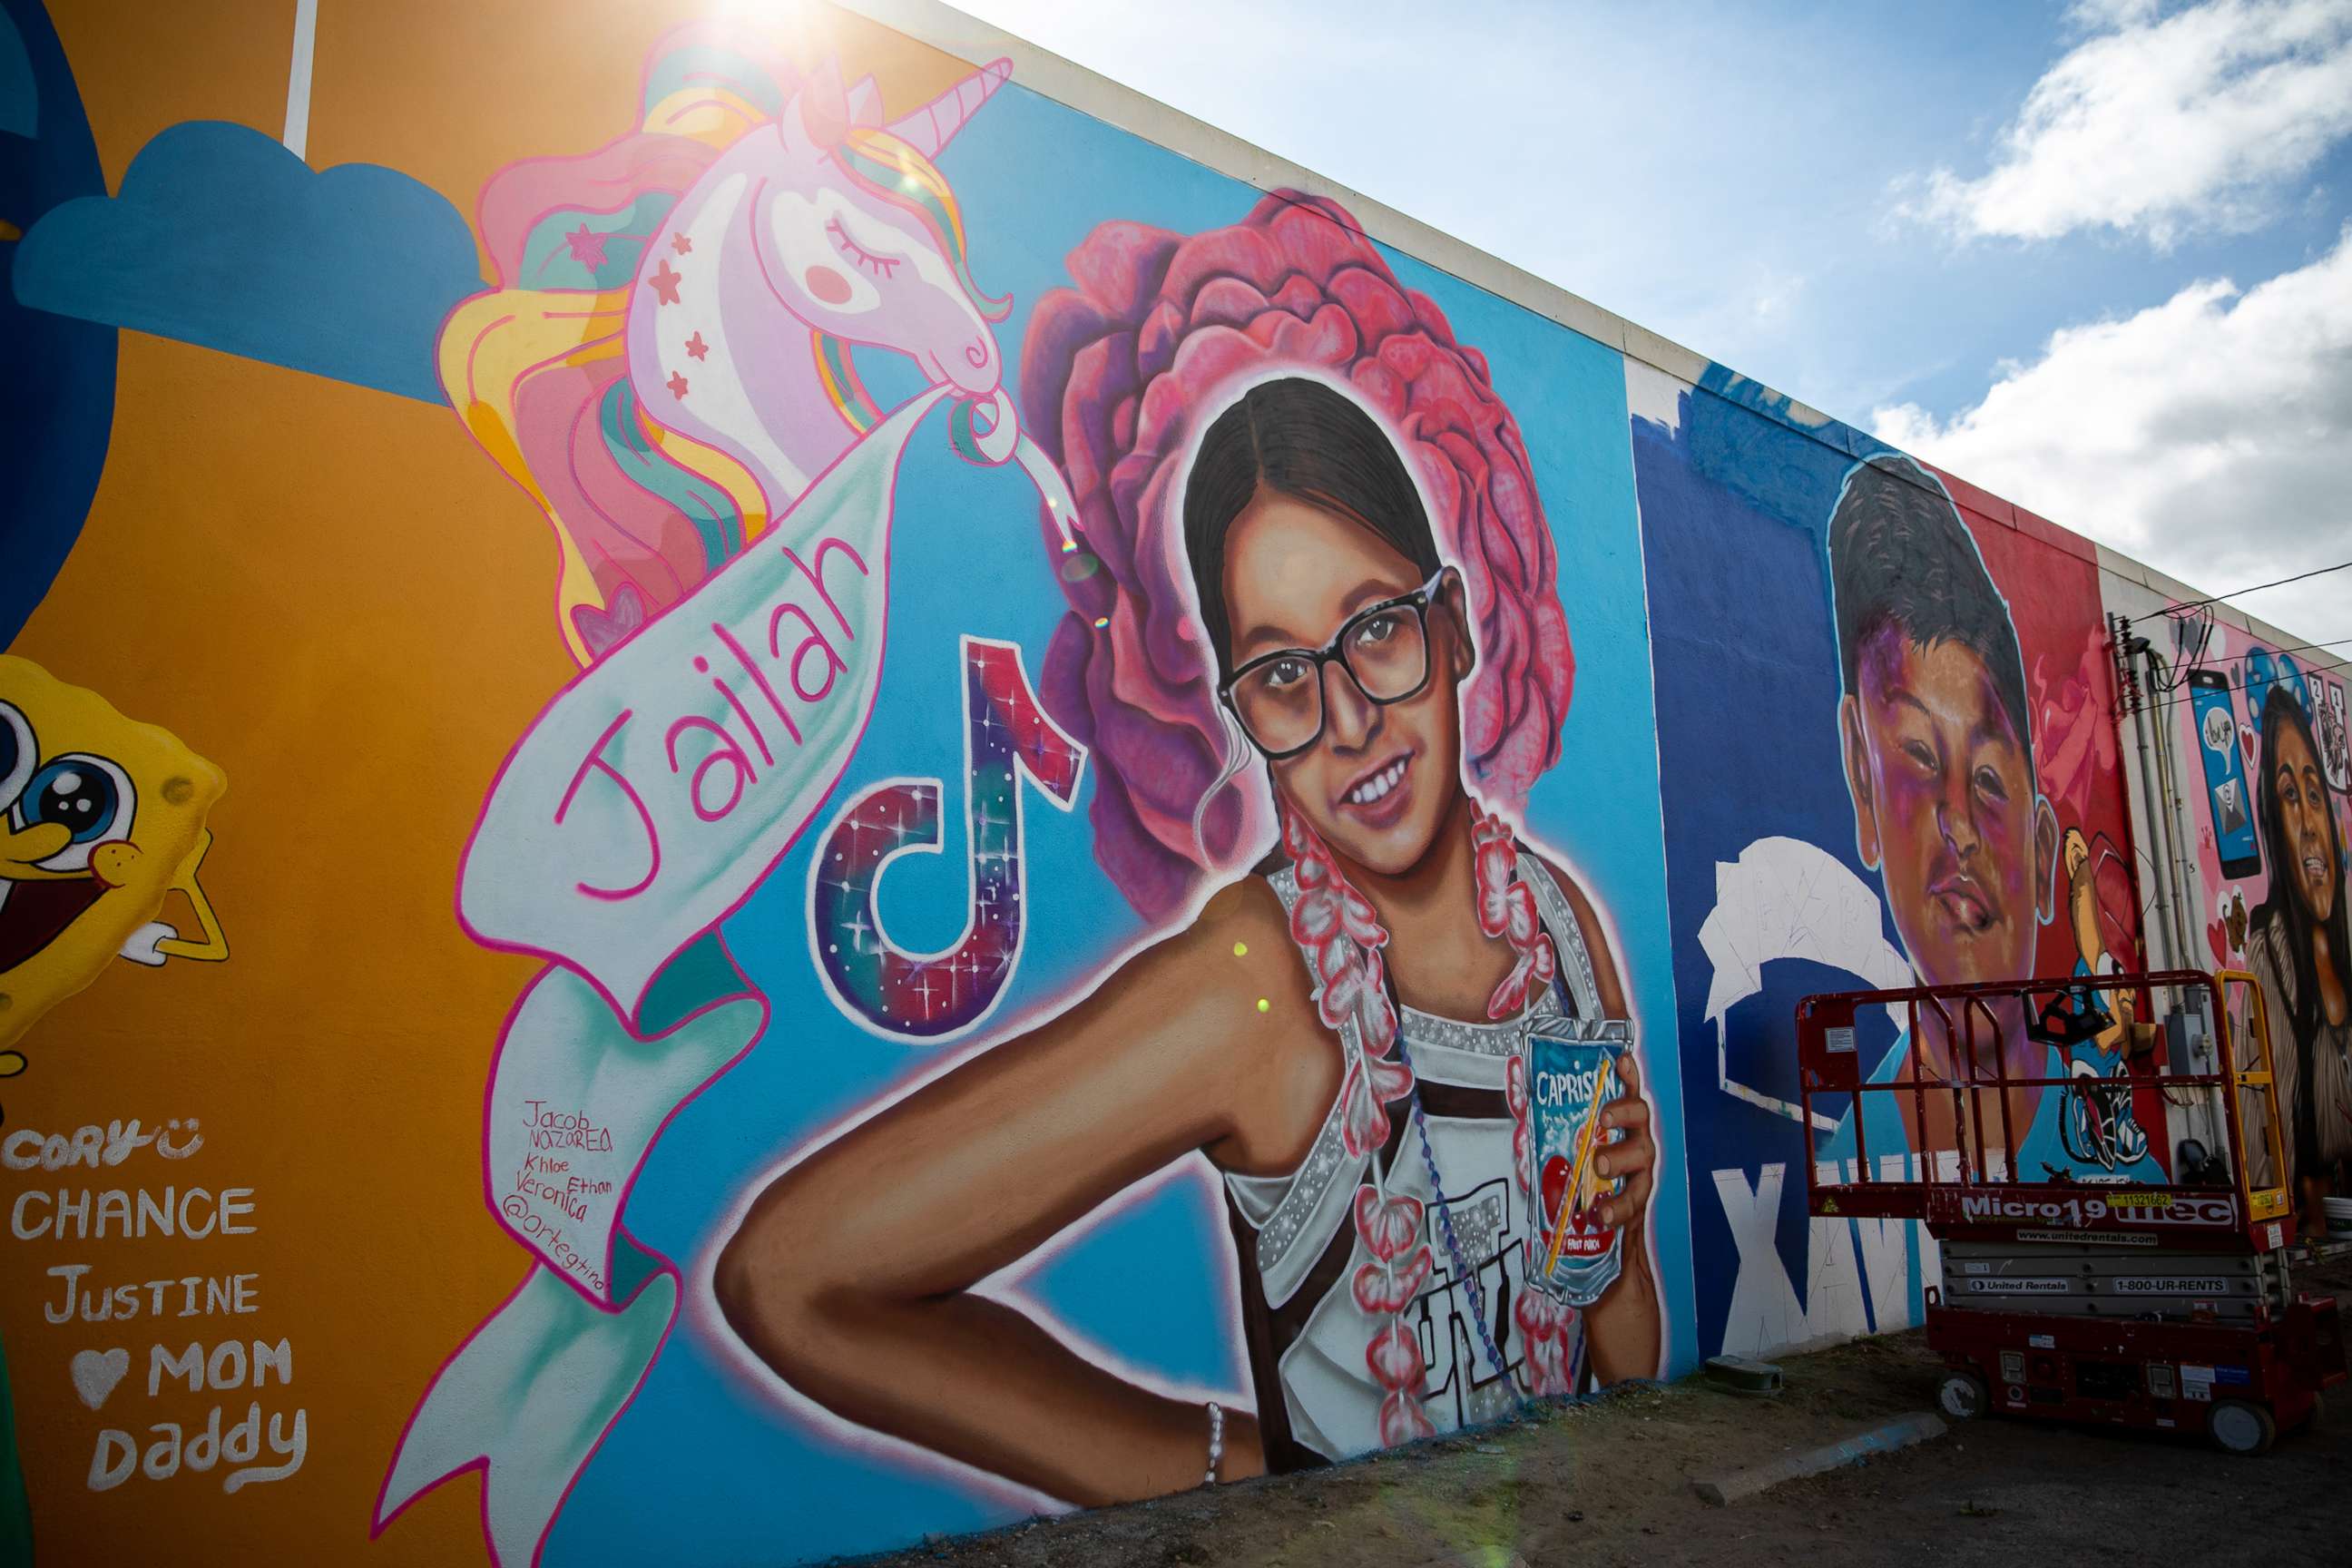 PHOTO: A mural in honor of Jailah Nicole Silguero, along with others for children who died in the Robb Elementary school shooting, fill the wall of a building in downtown Uvalde, Texas, Aug. 21, 2022.